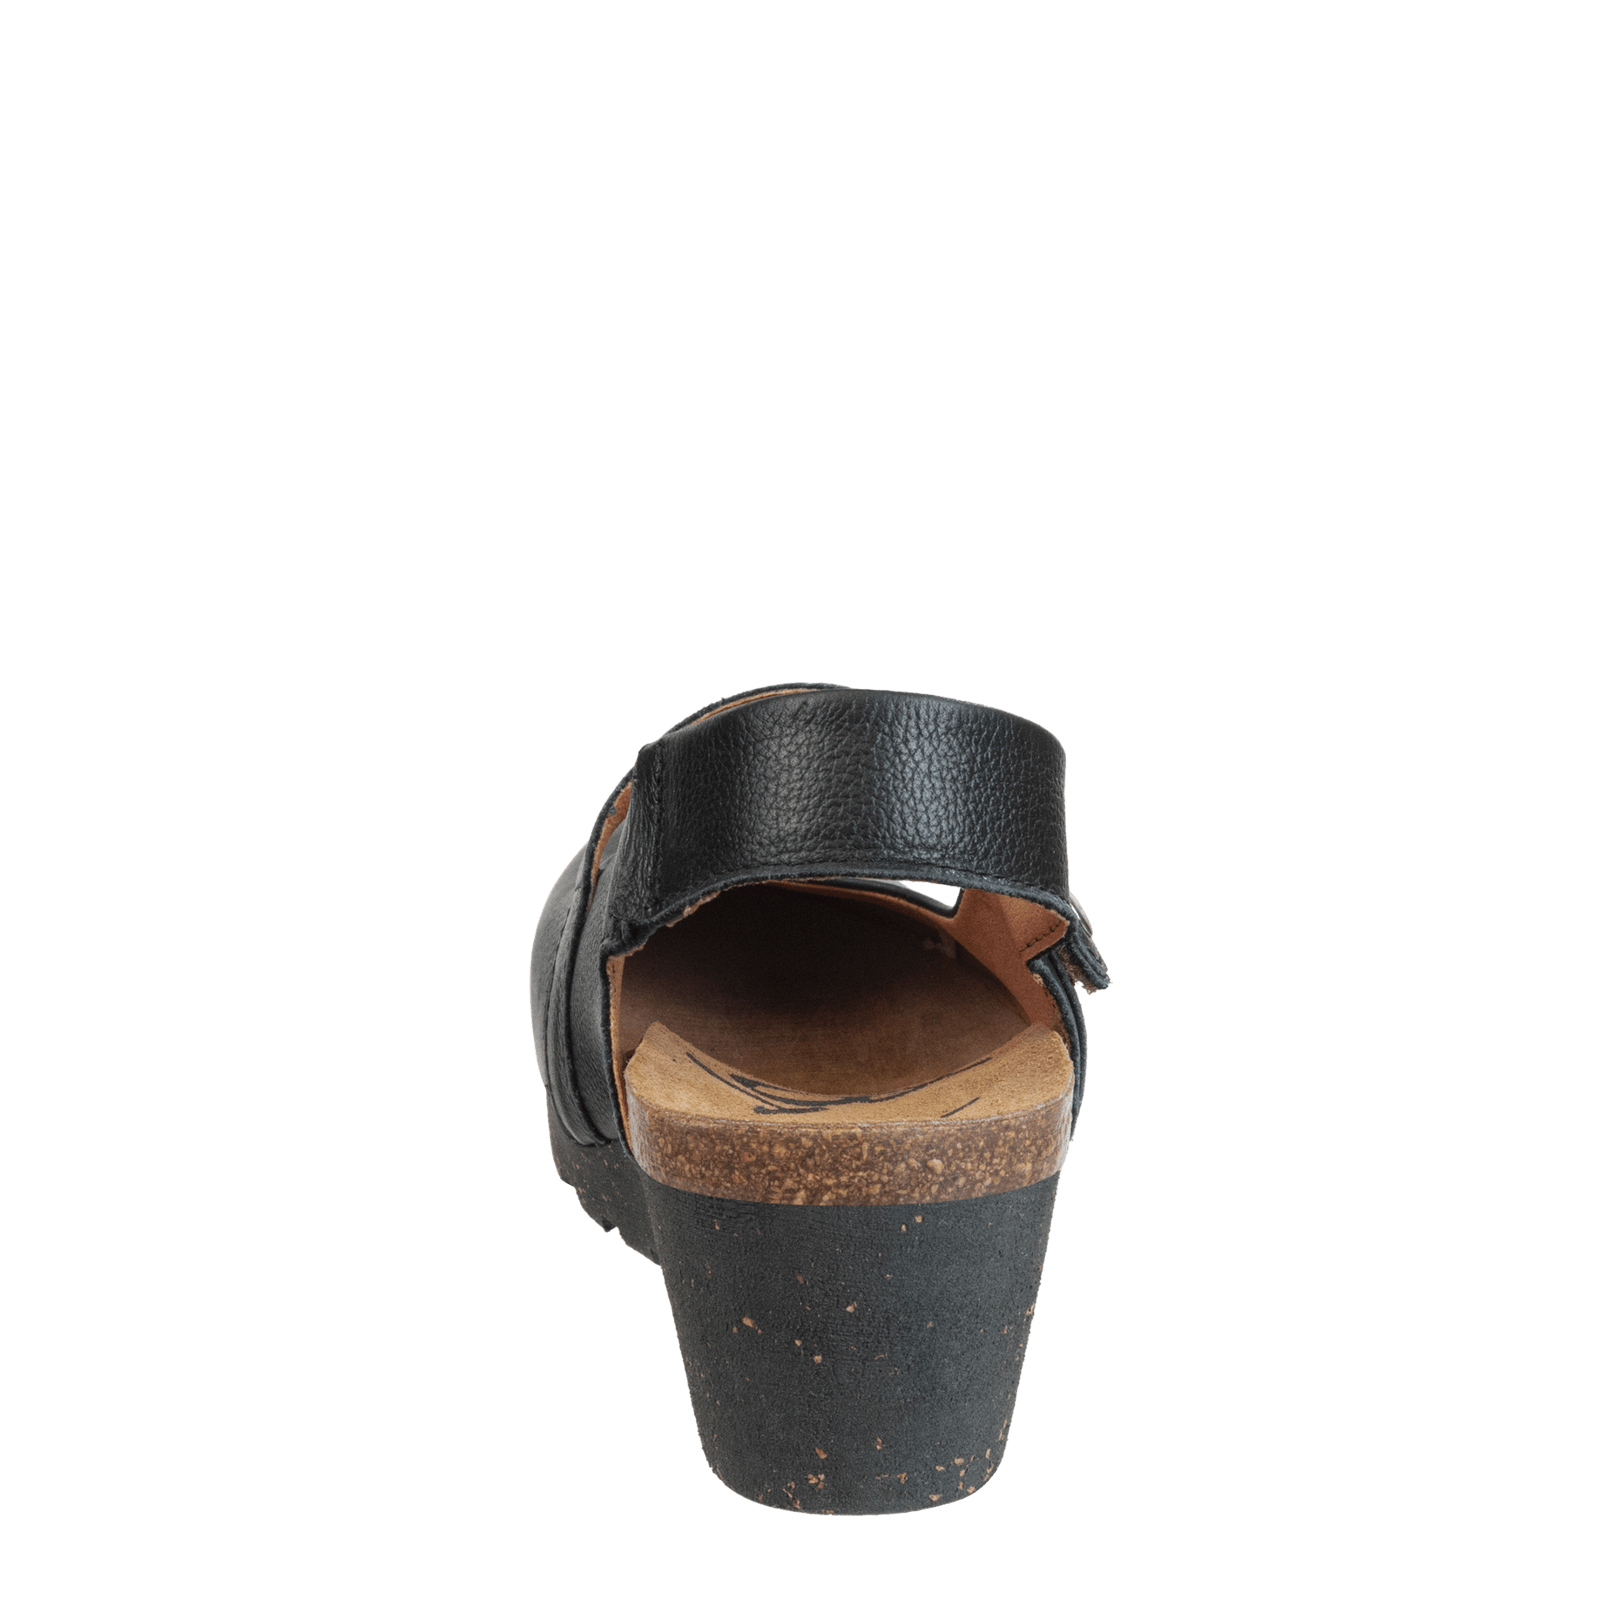 LEATHER CLOGS WITH BACK STRAP - Black